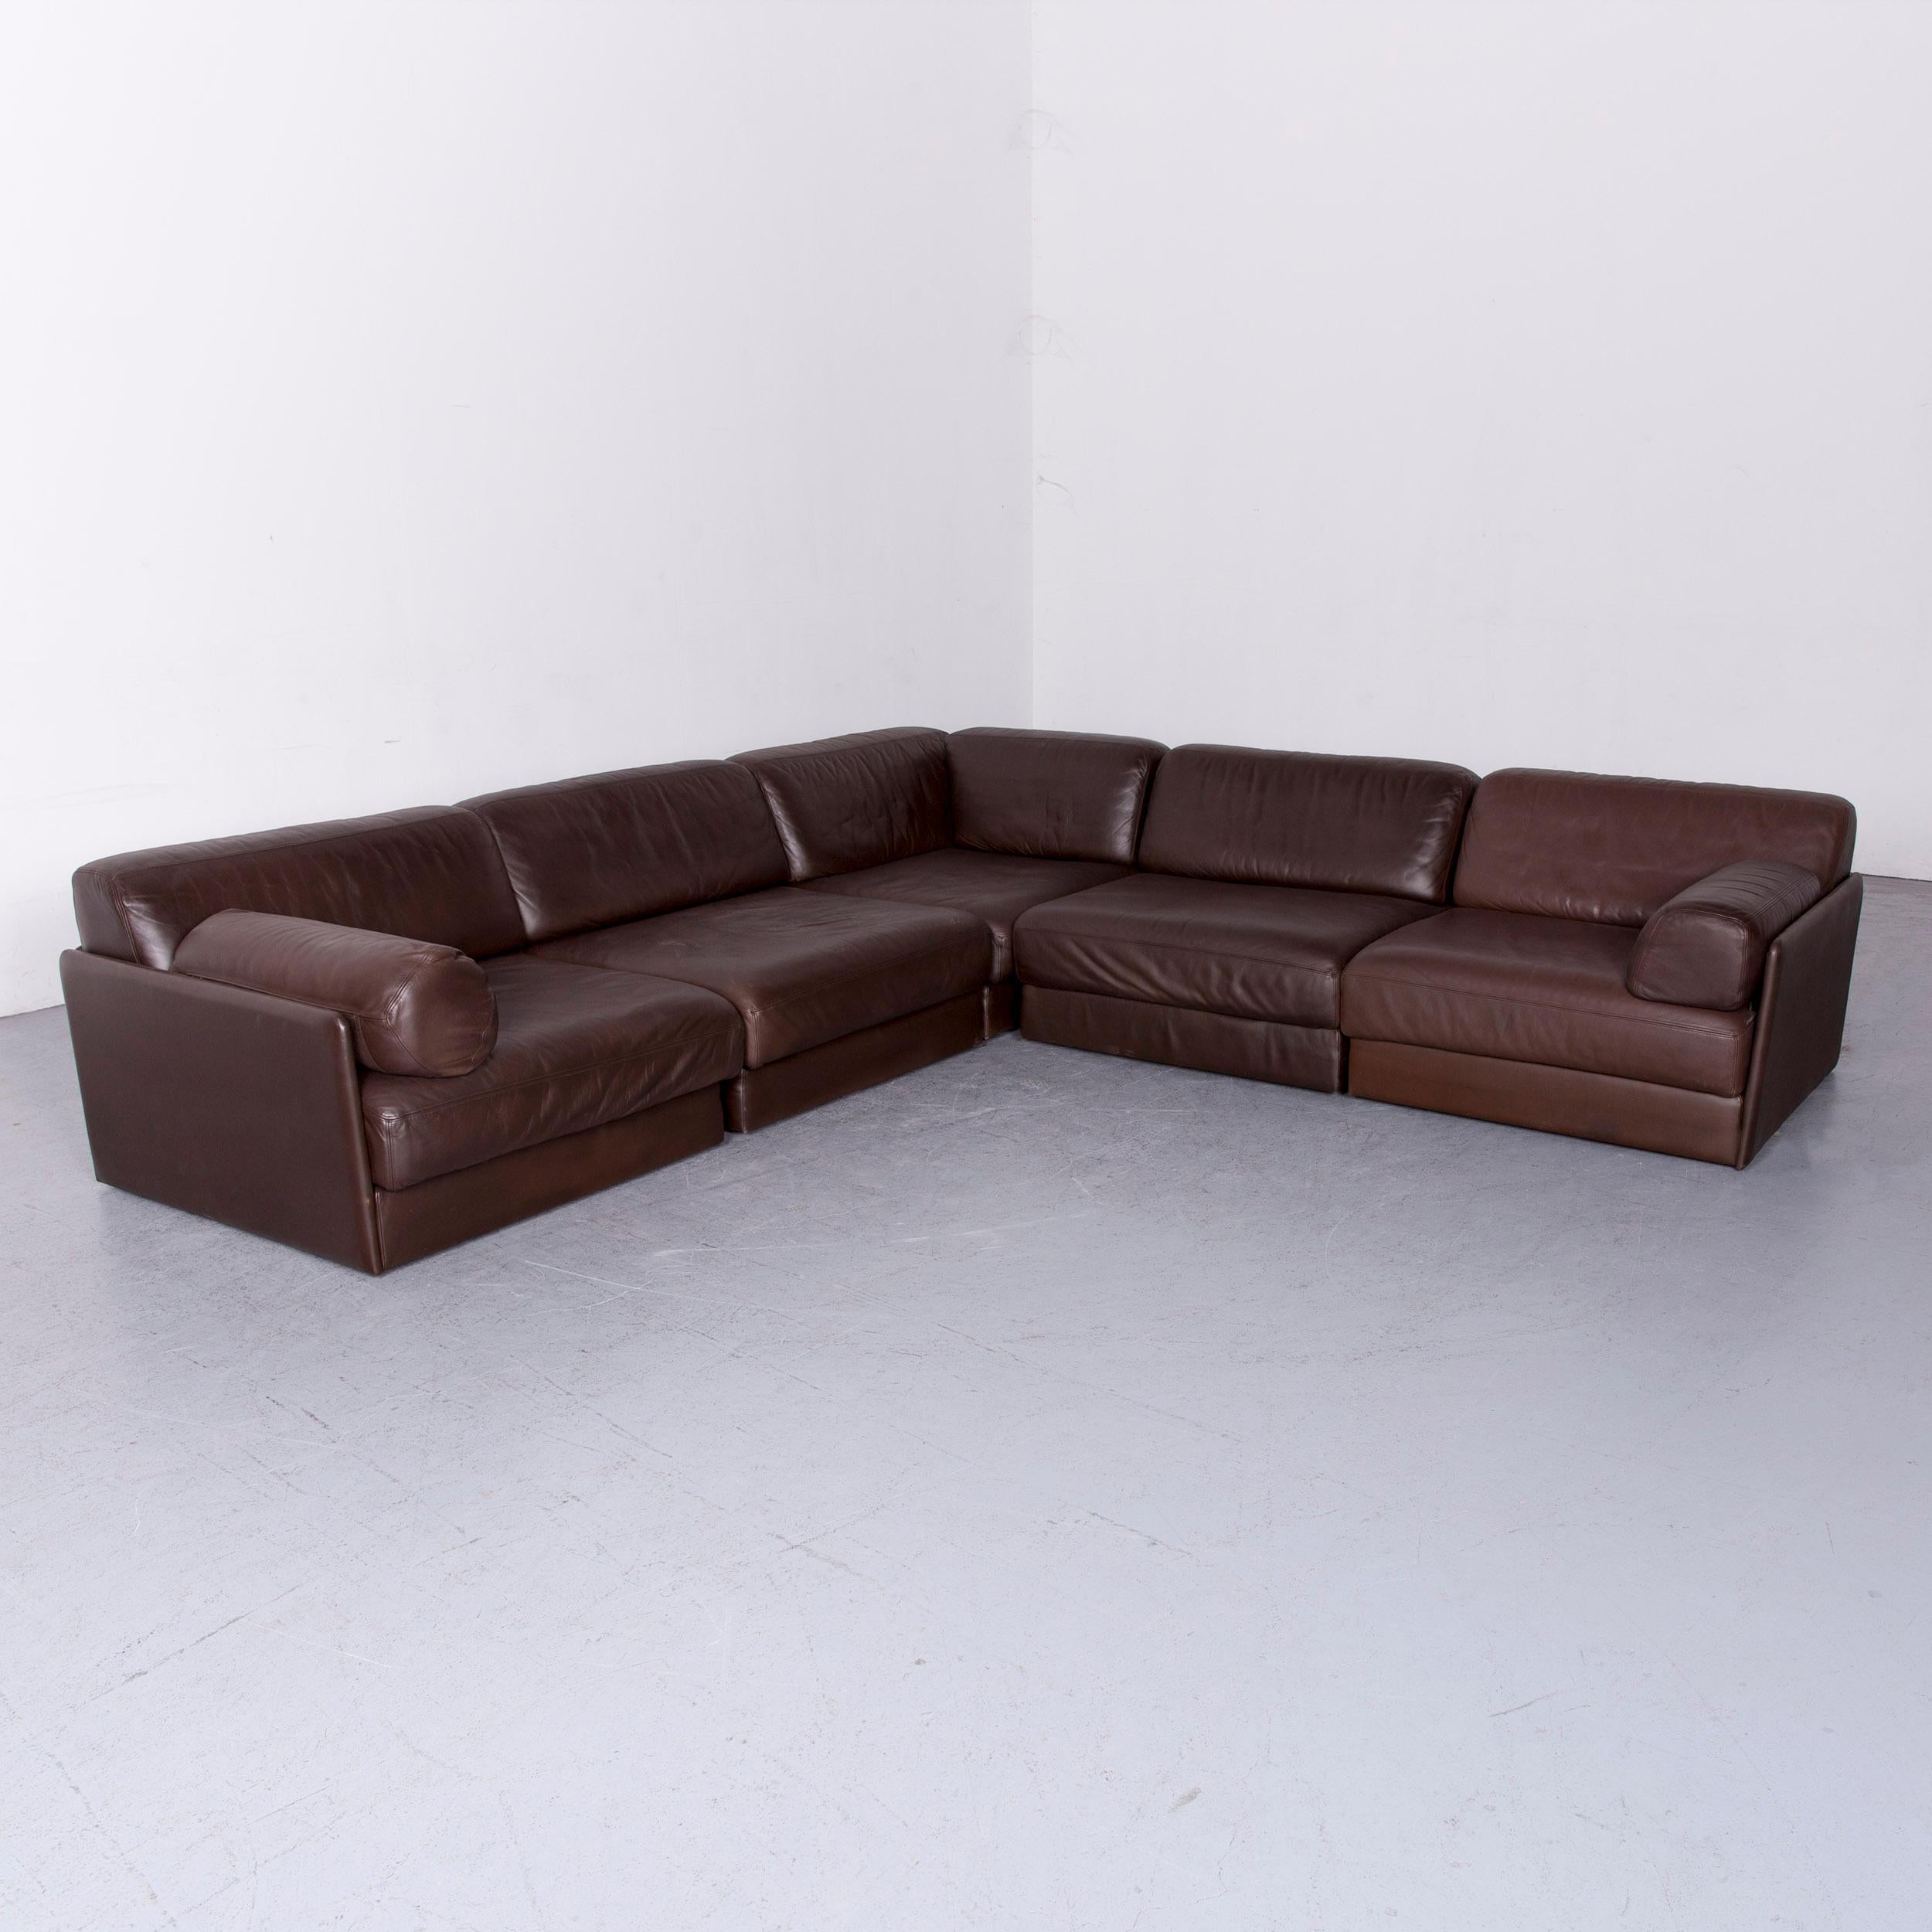 We bring to you a De Sede DS 76 designer sofa brown leather corner couch.